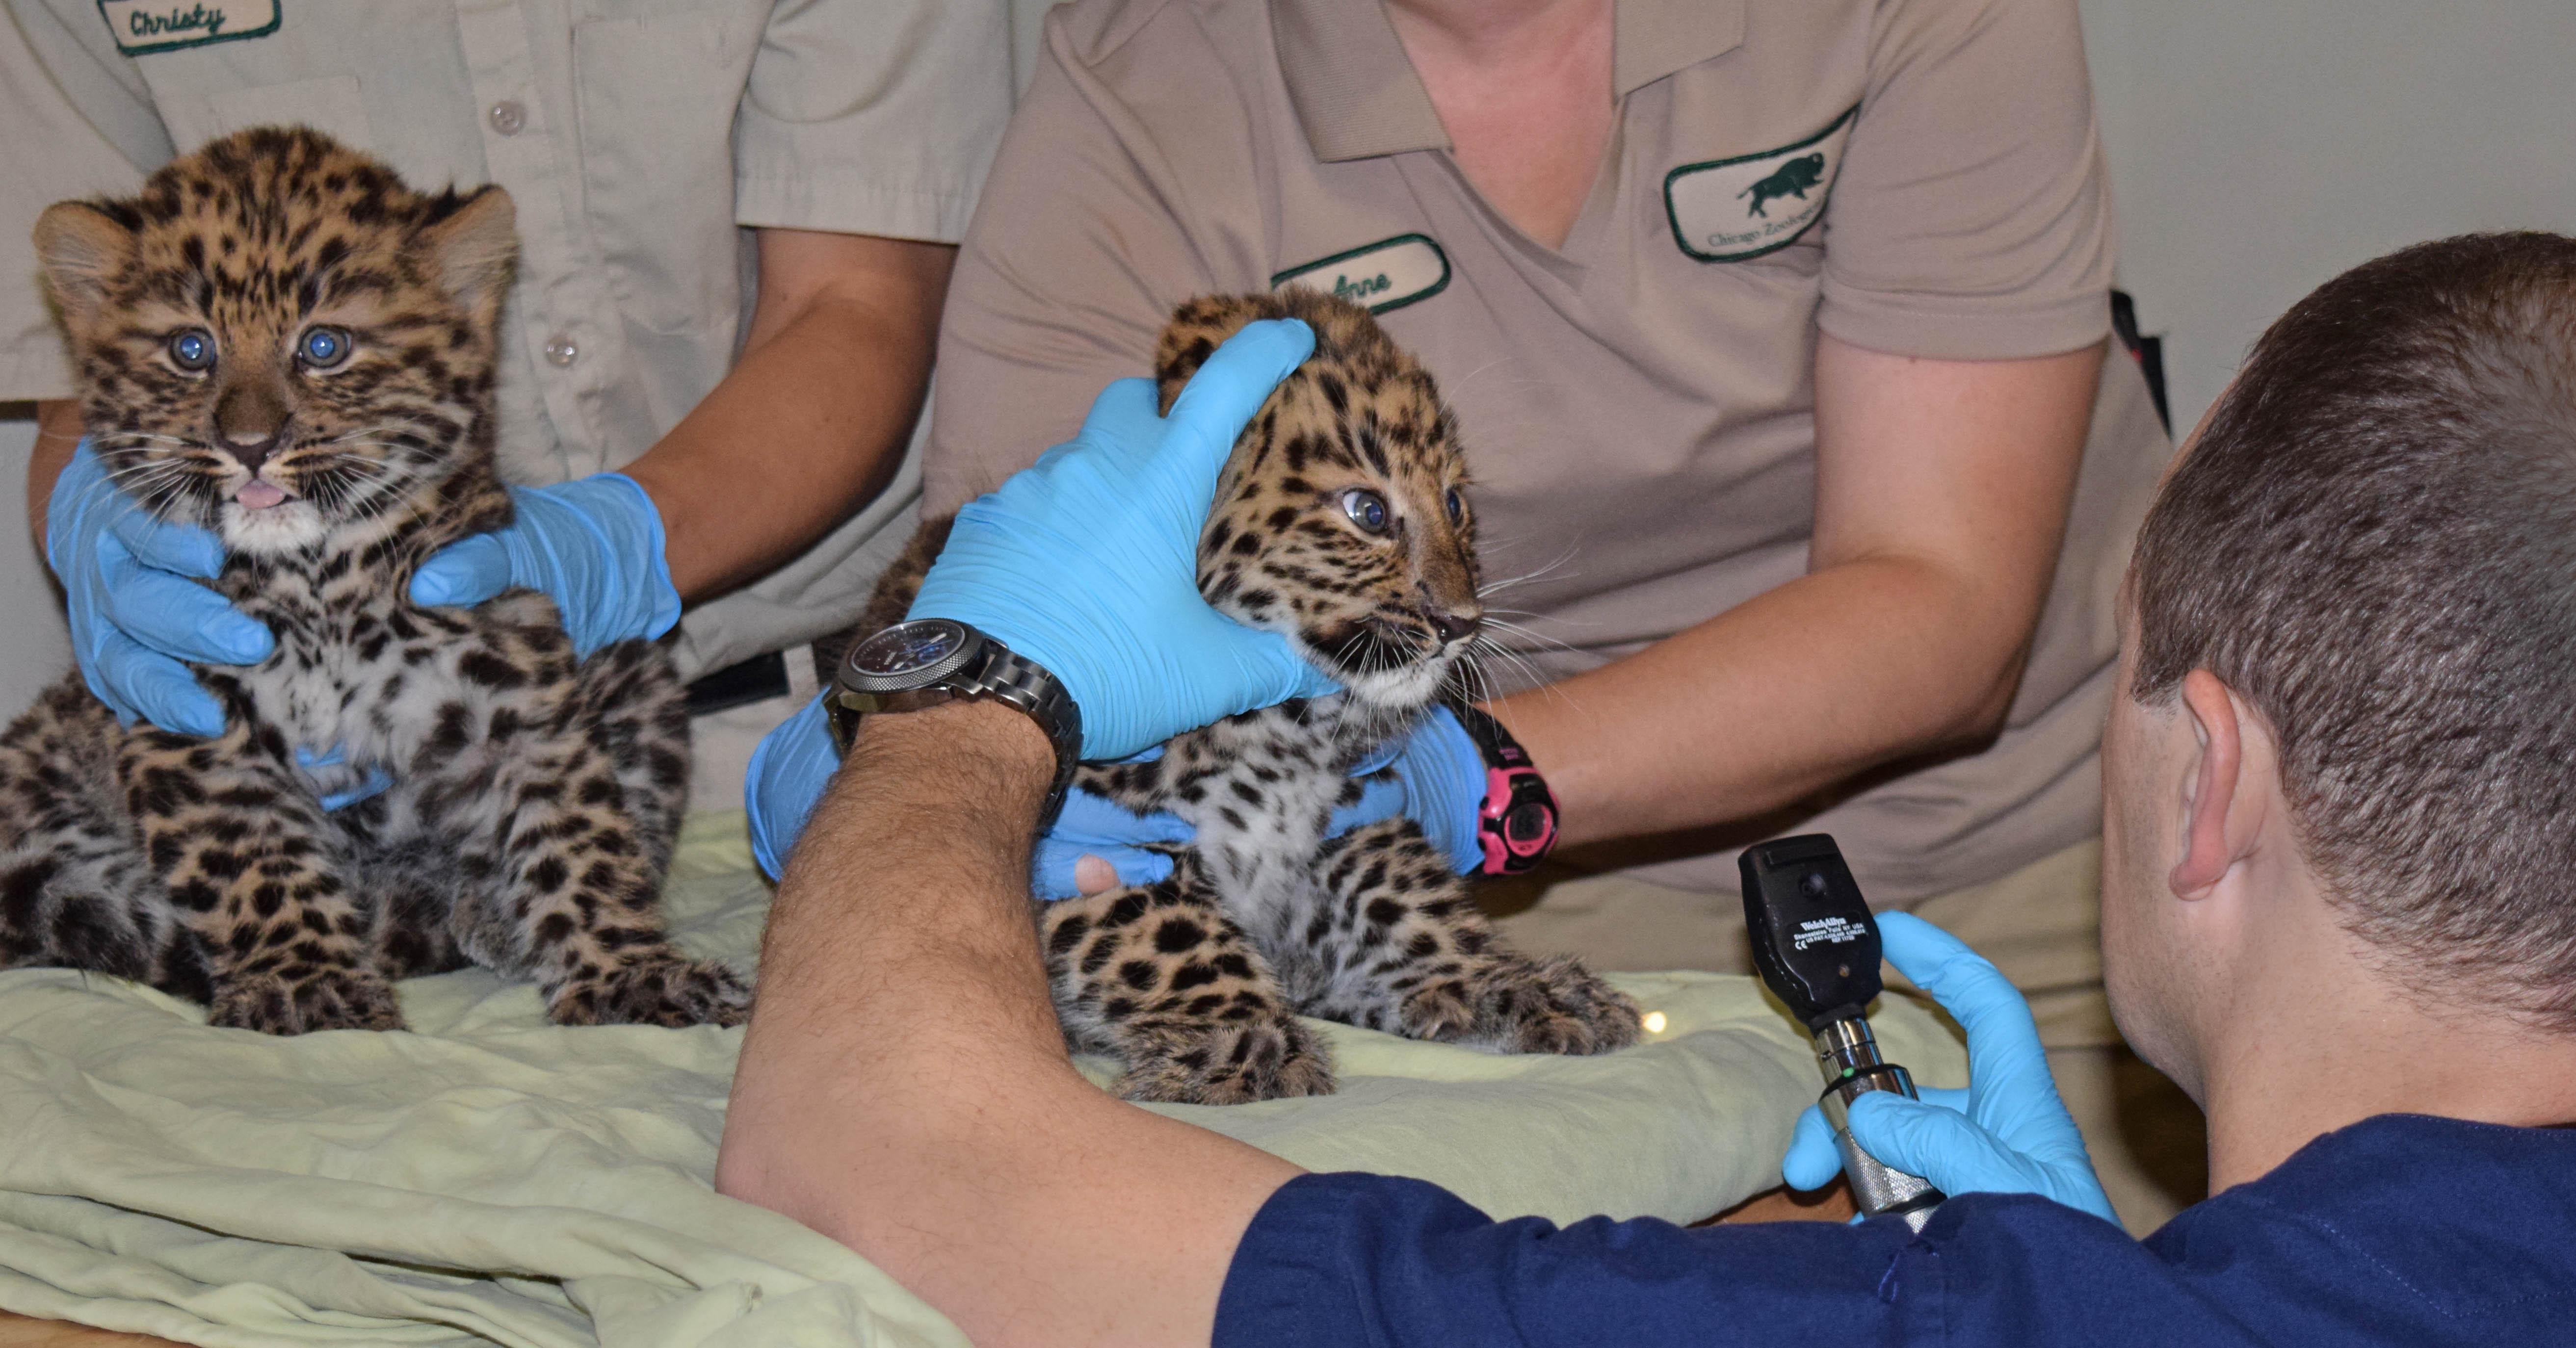 Dr. Michael Adkesson, vice president of clinical medicine for the Chicago Zoological Society, examines one of two male Amur leopard cubs born at Brookfield Zoo on April 18. (Cathy Bazzoni / Chicago Zoological Society)